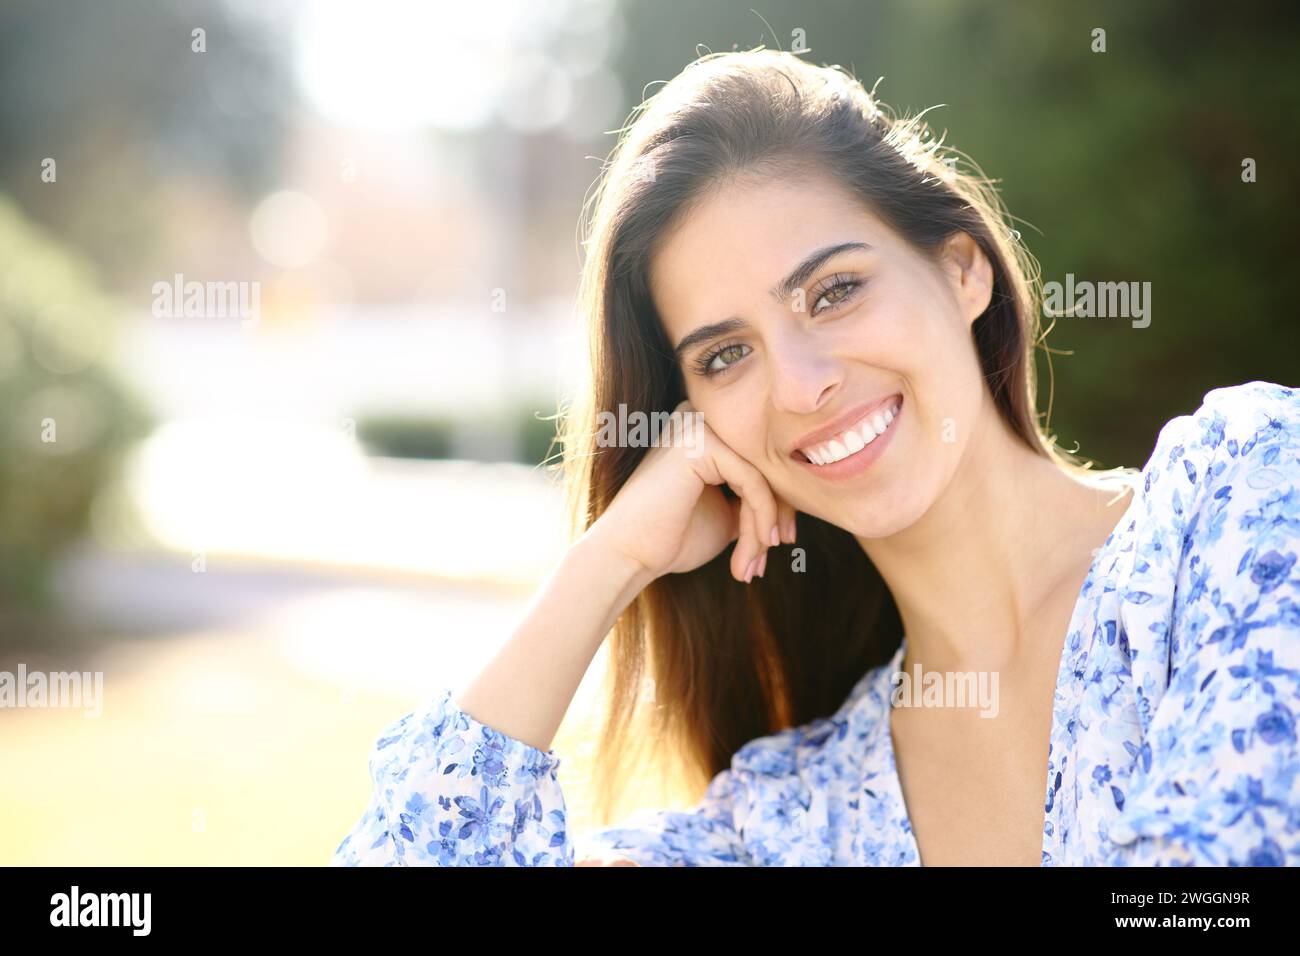 Beauty woman with white smile looks at you in a park Stock Photo